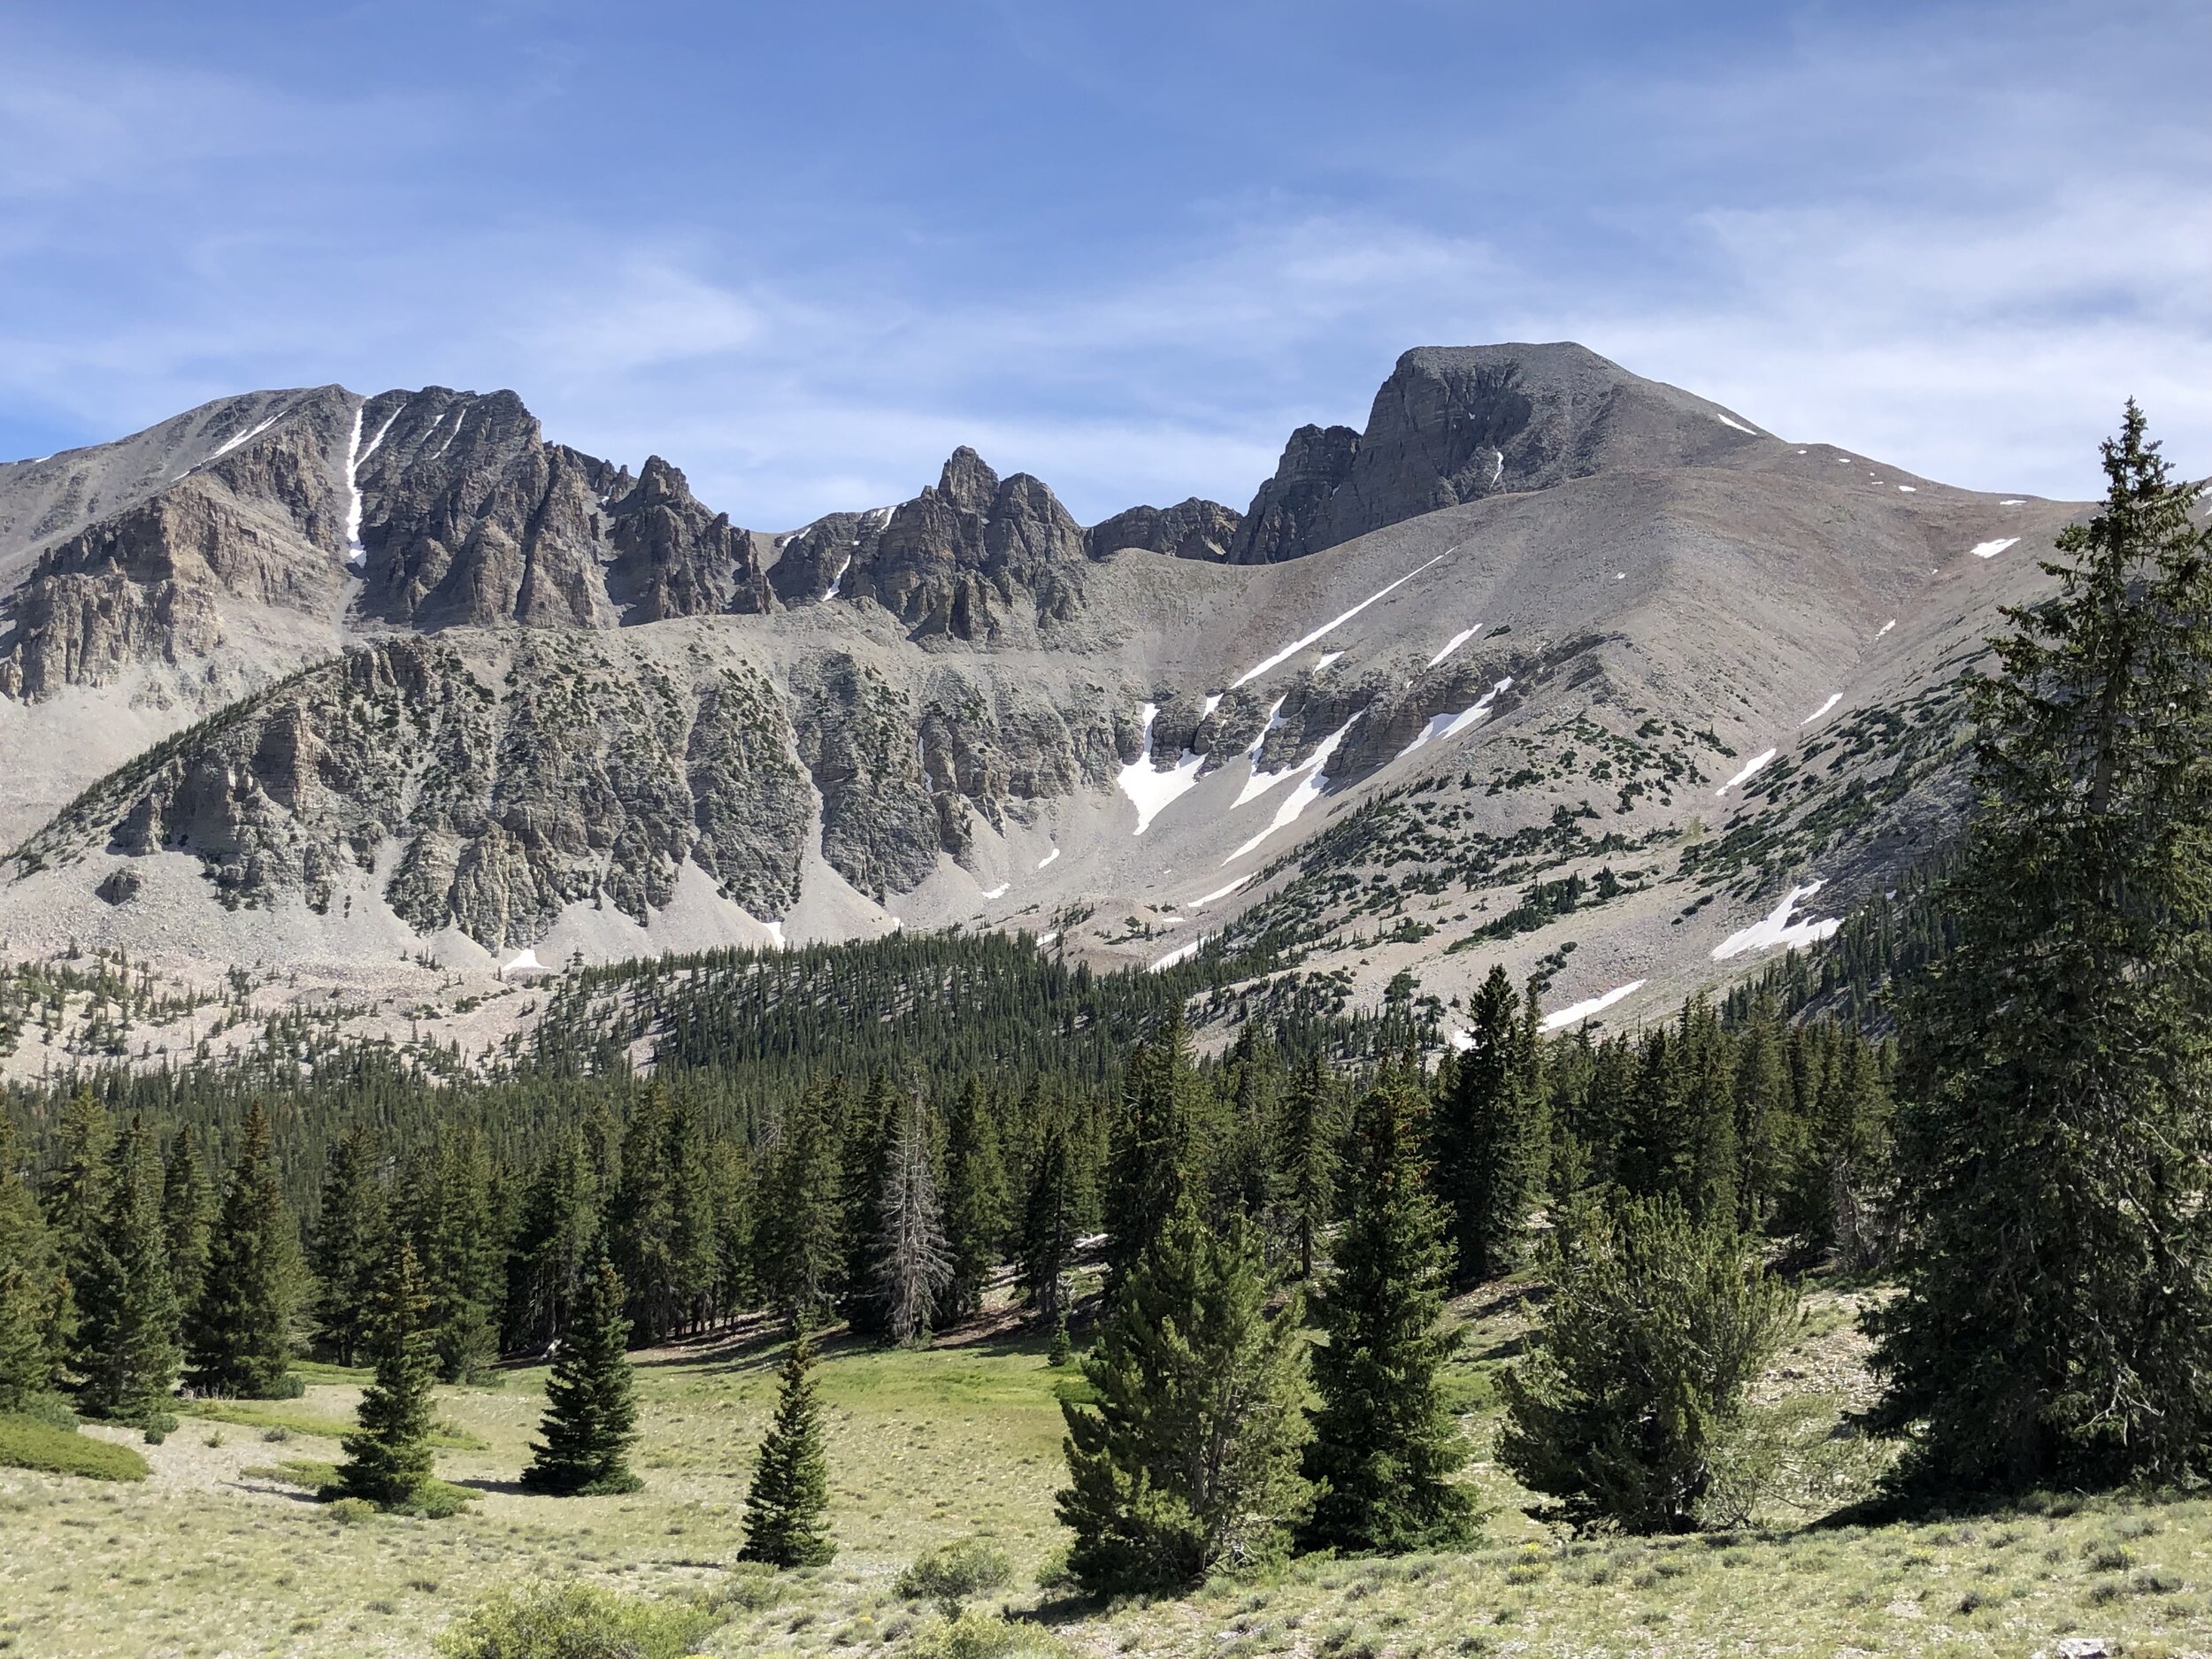 The park features thirteen peaks that rise more than 11,000 feet.